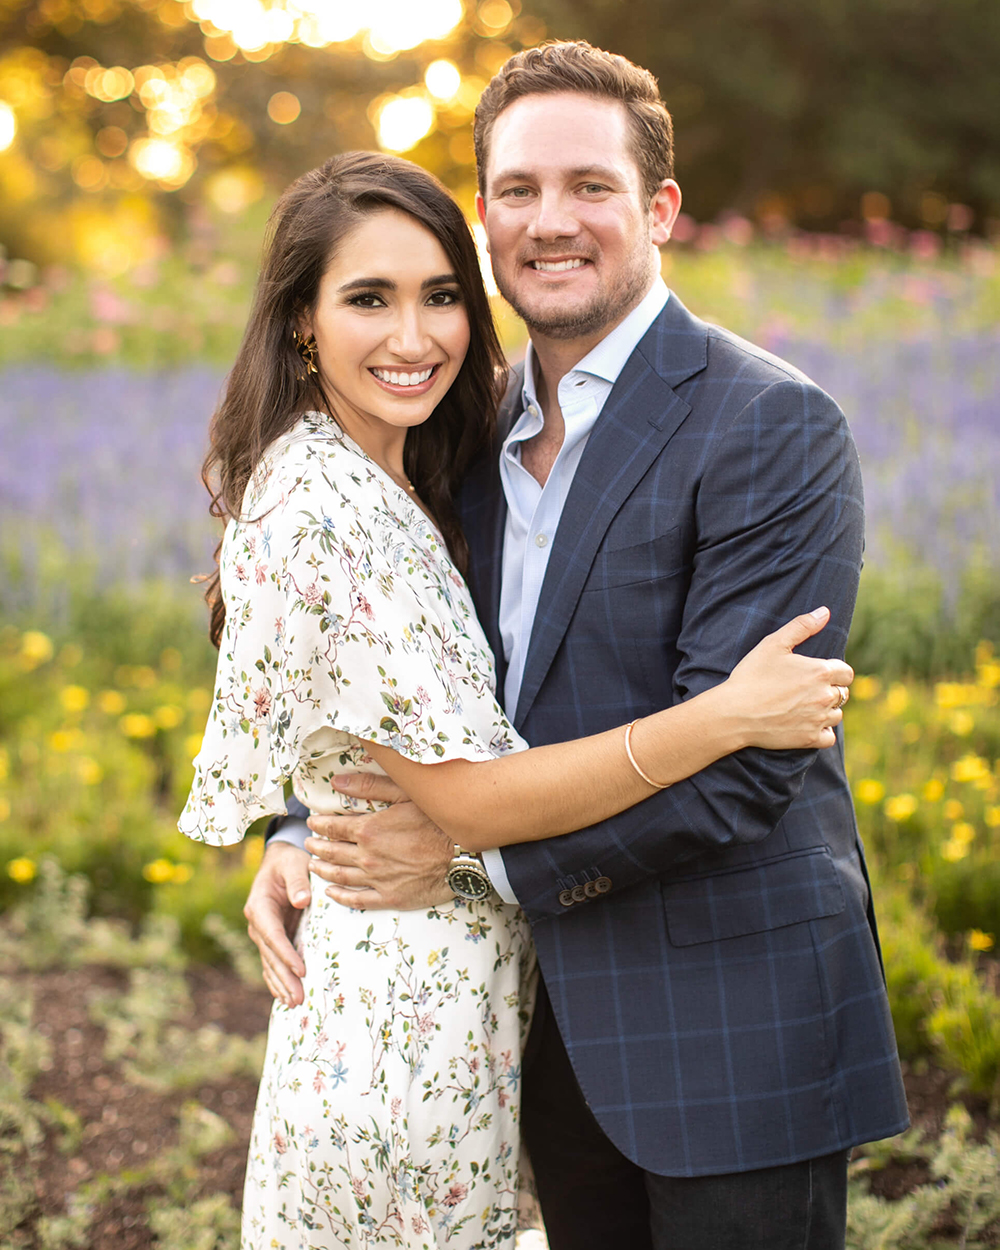 Kalize and Clay’s Engagement Portraits at the Dallas Arboretum